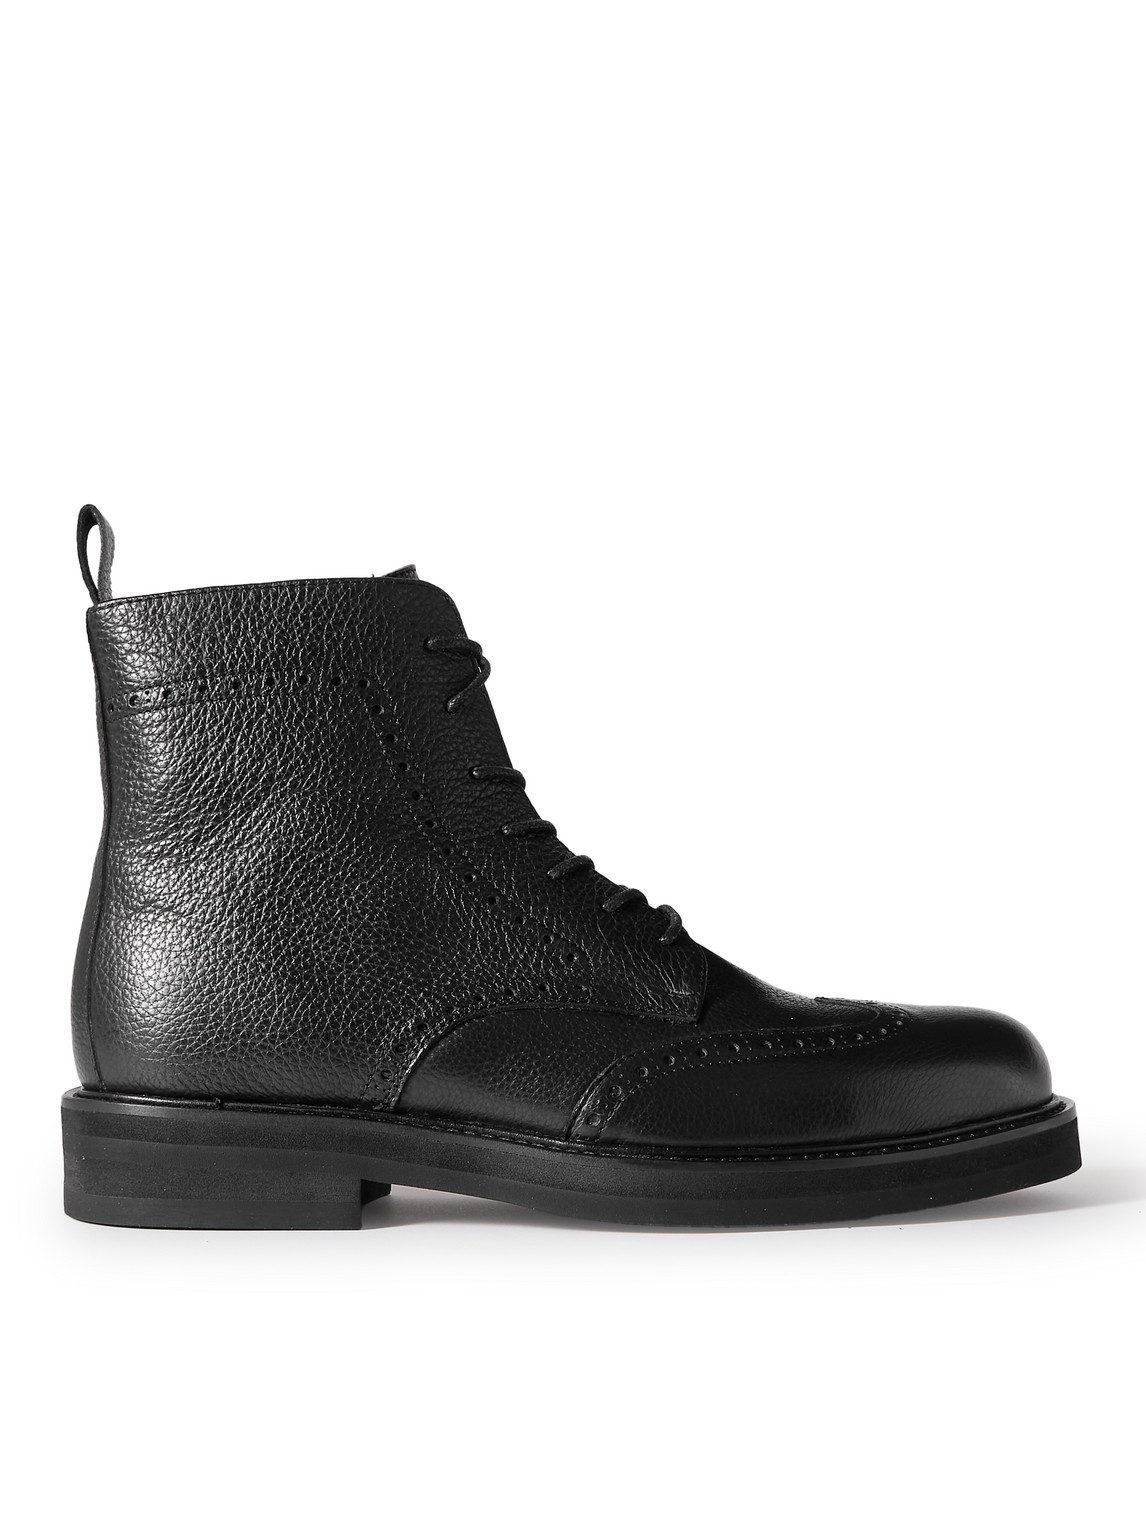 Jacques Full-Grain Leather Brogue Boots